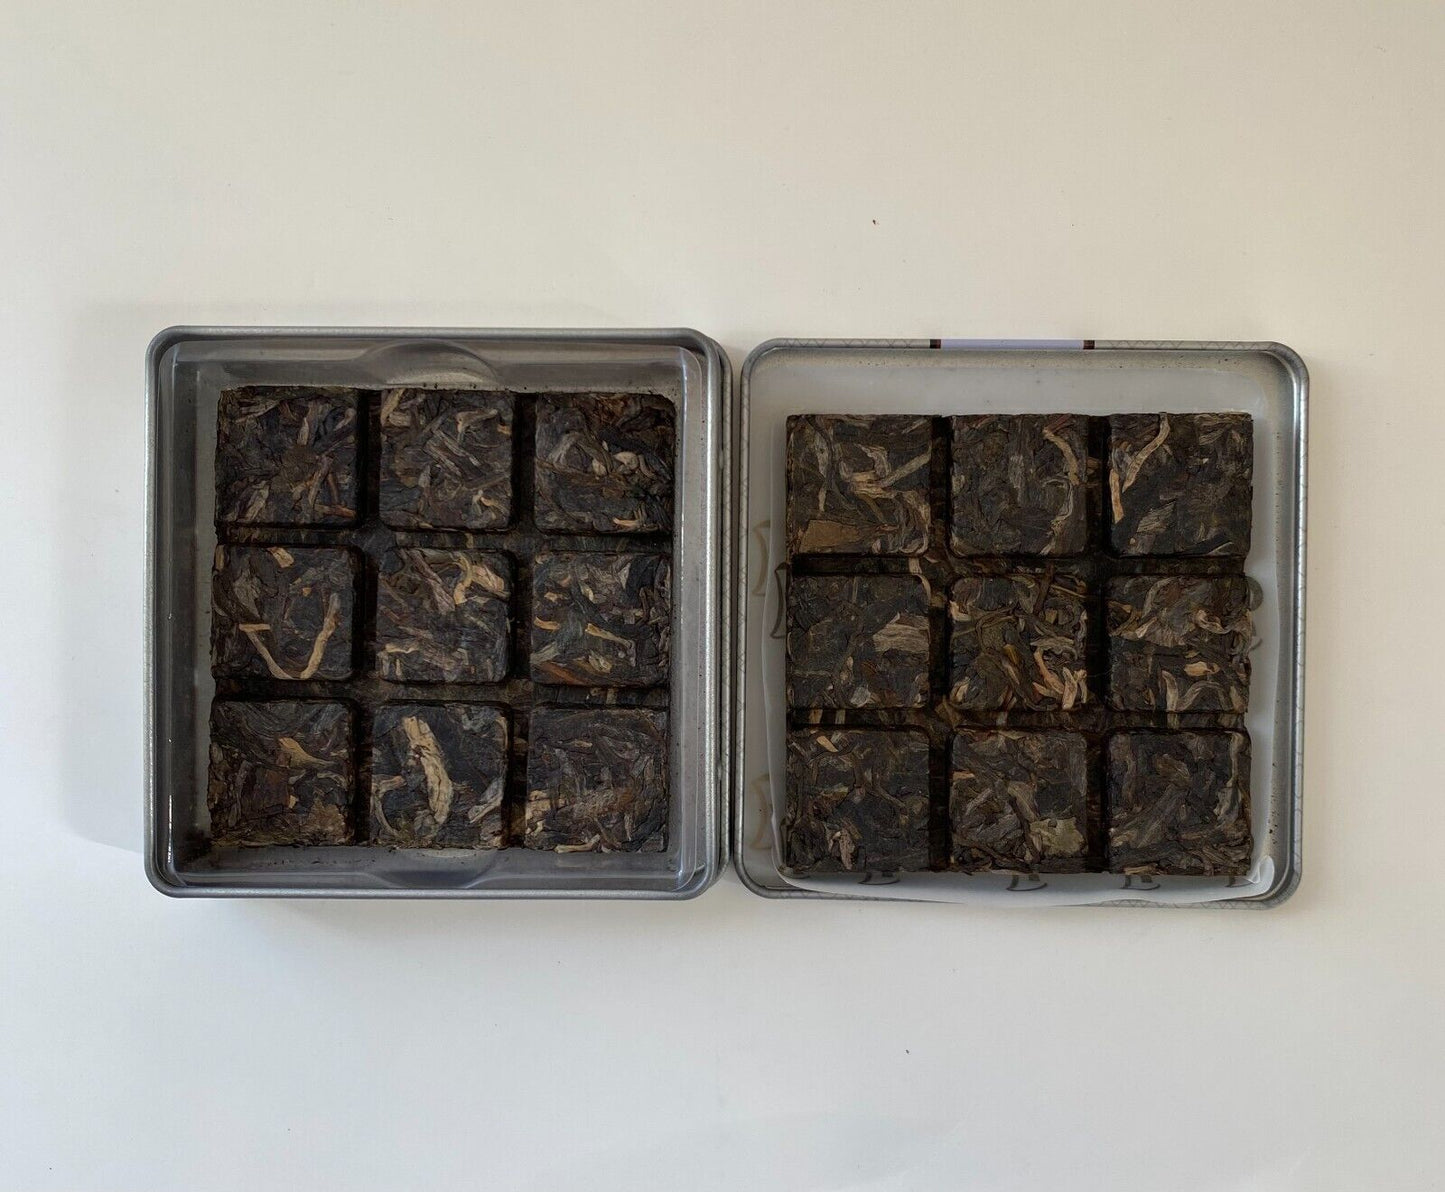 Yunnan Changning Pu-erh Tea/Compressed & Squared Raw Tea/Easy to carry and break